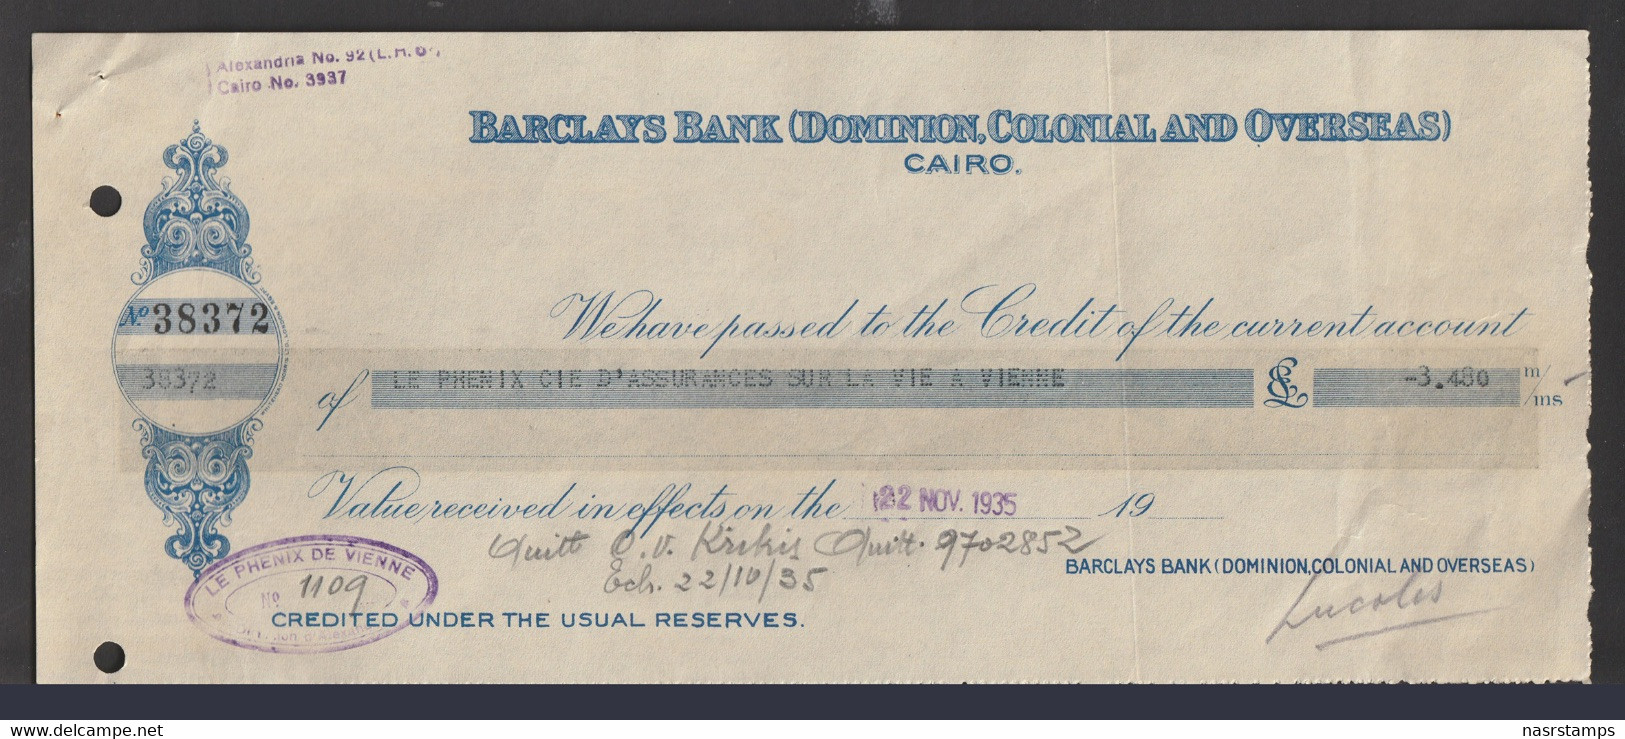 Egypt - 1935 - Vintage Check - Barclays Bank ( DOMINION, COLONIAL AND OVERSEAS - CAIRO ) - Séries Collector